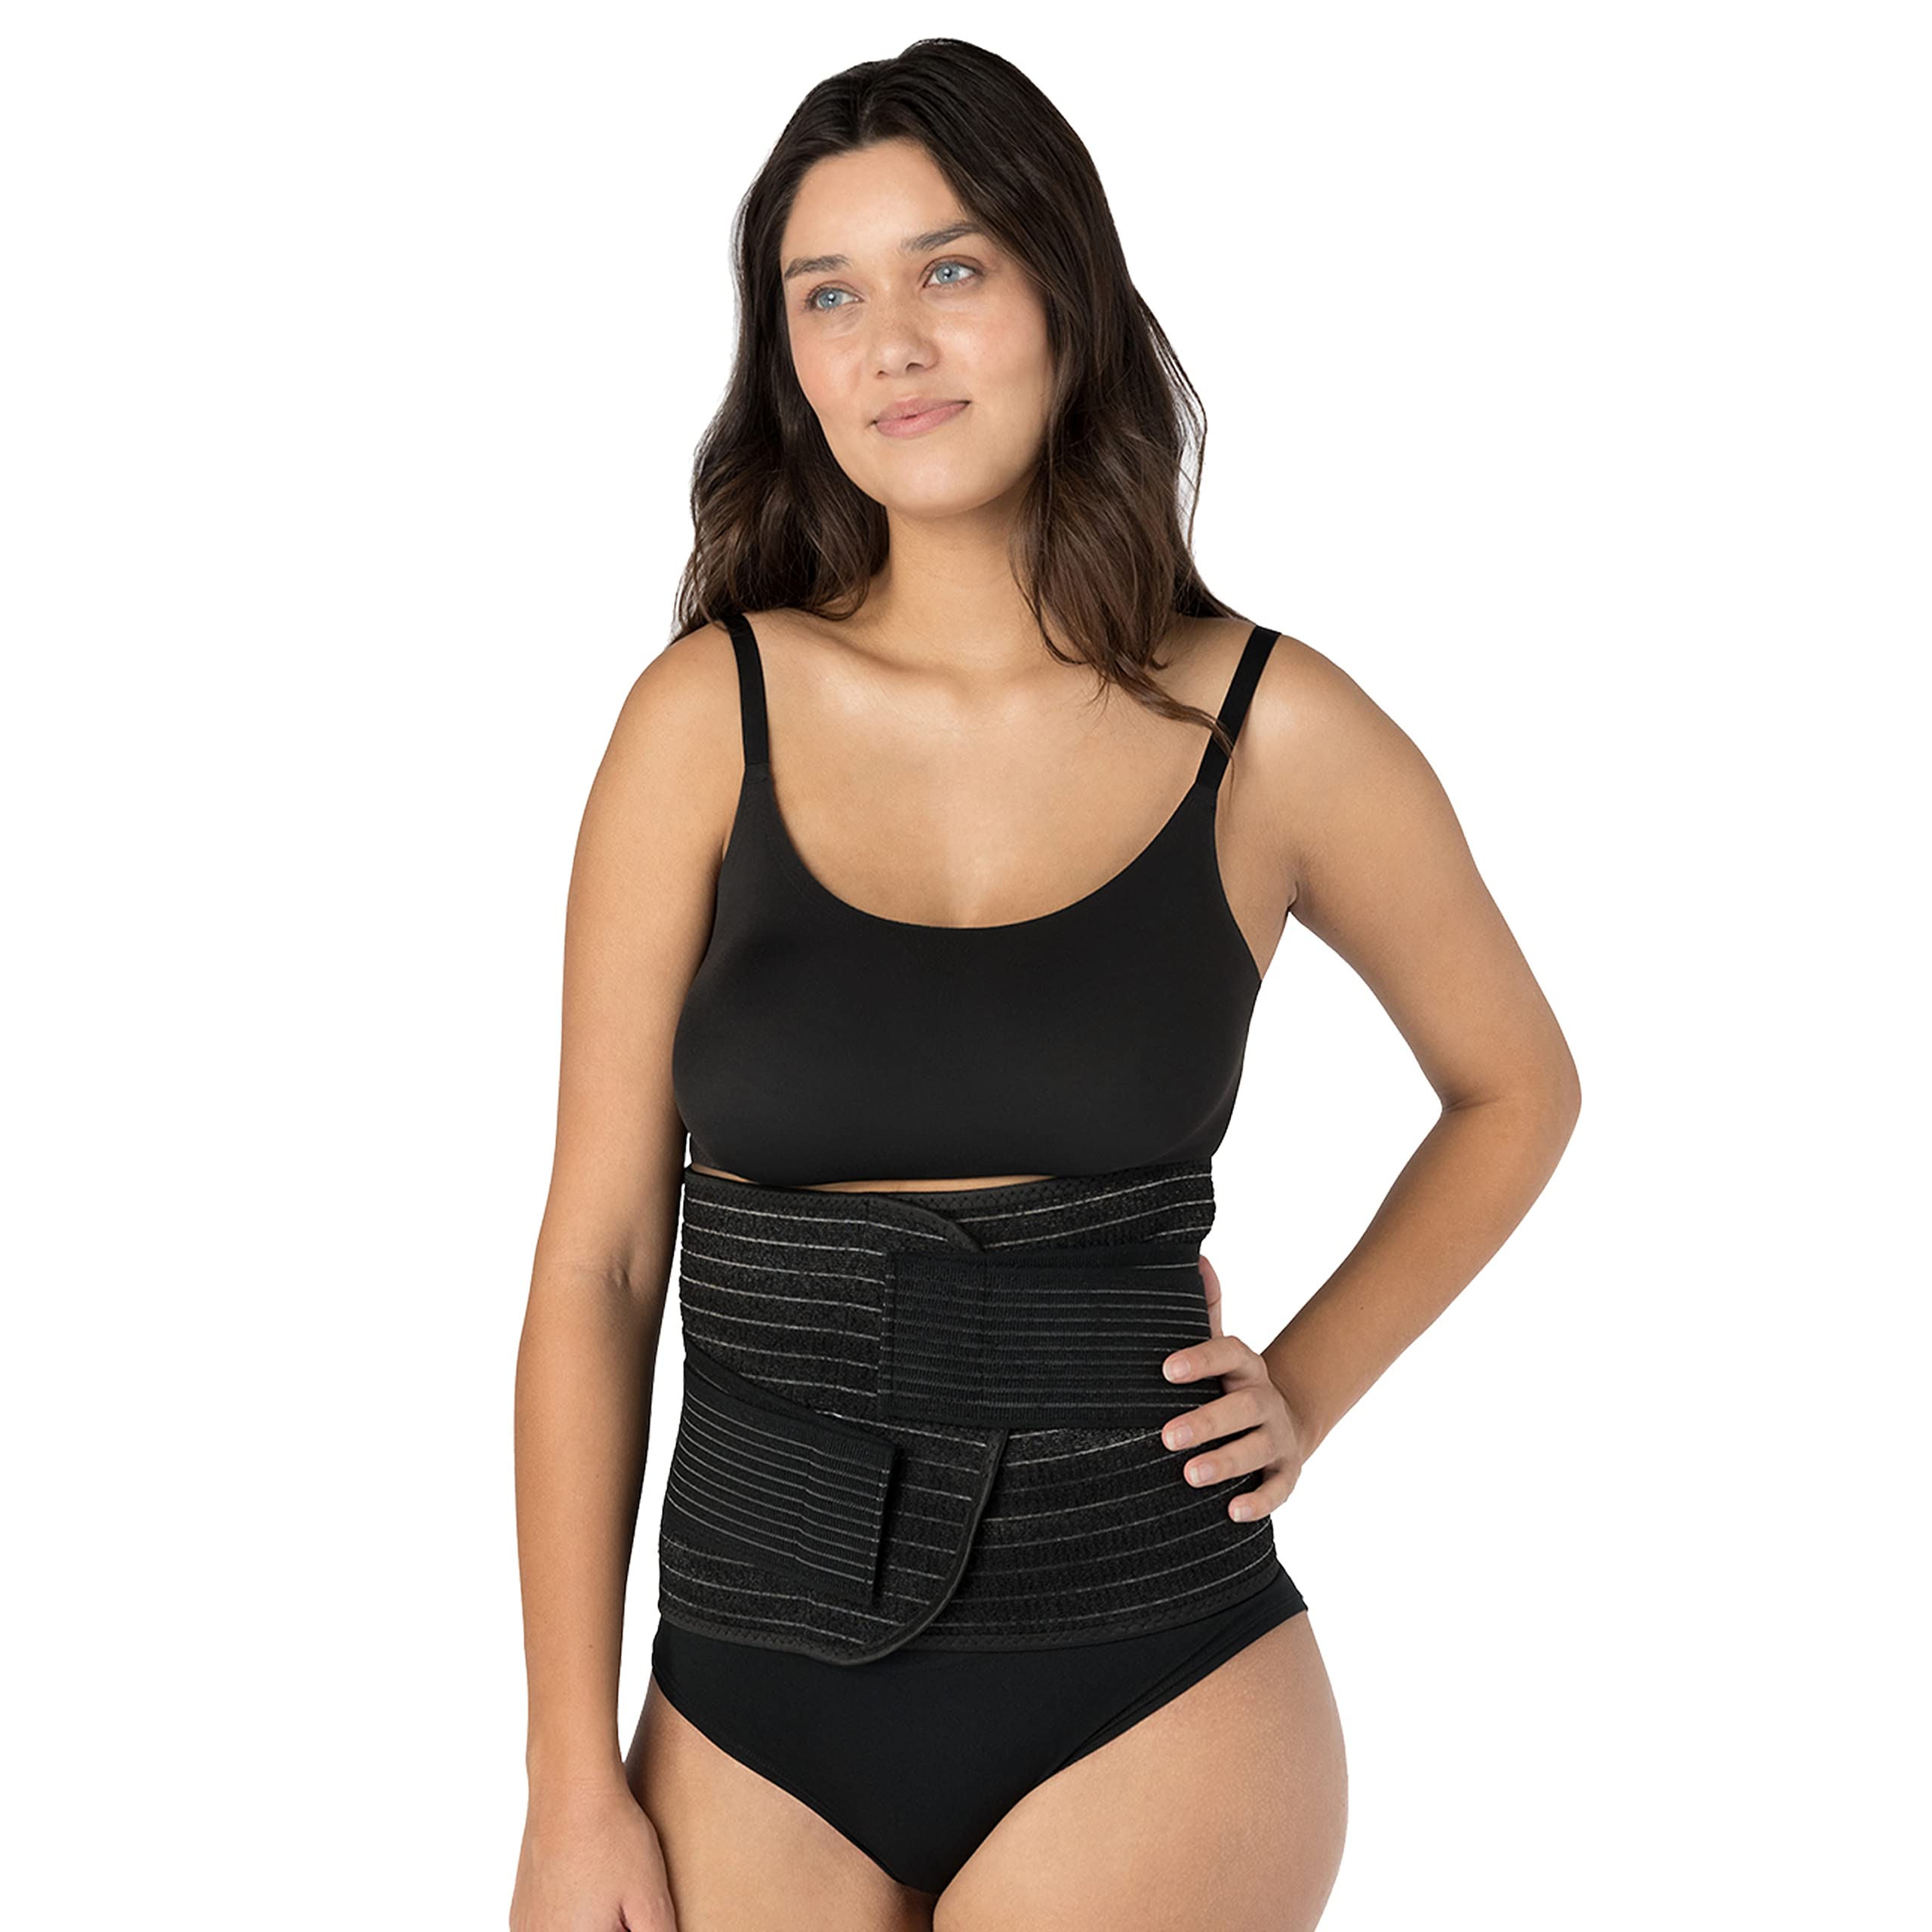 Belly Bandit Bamboo in Black